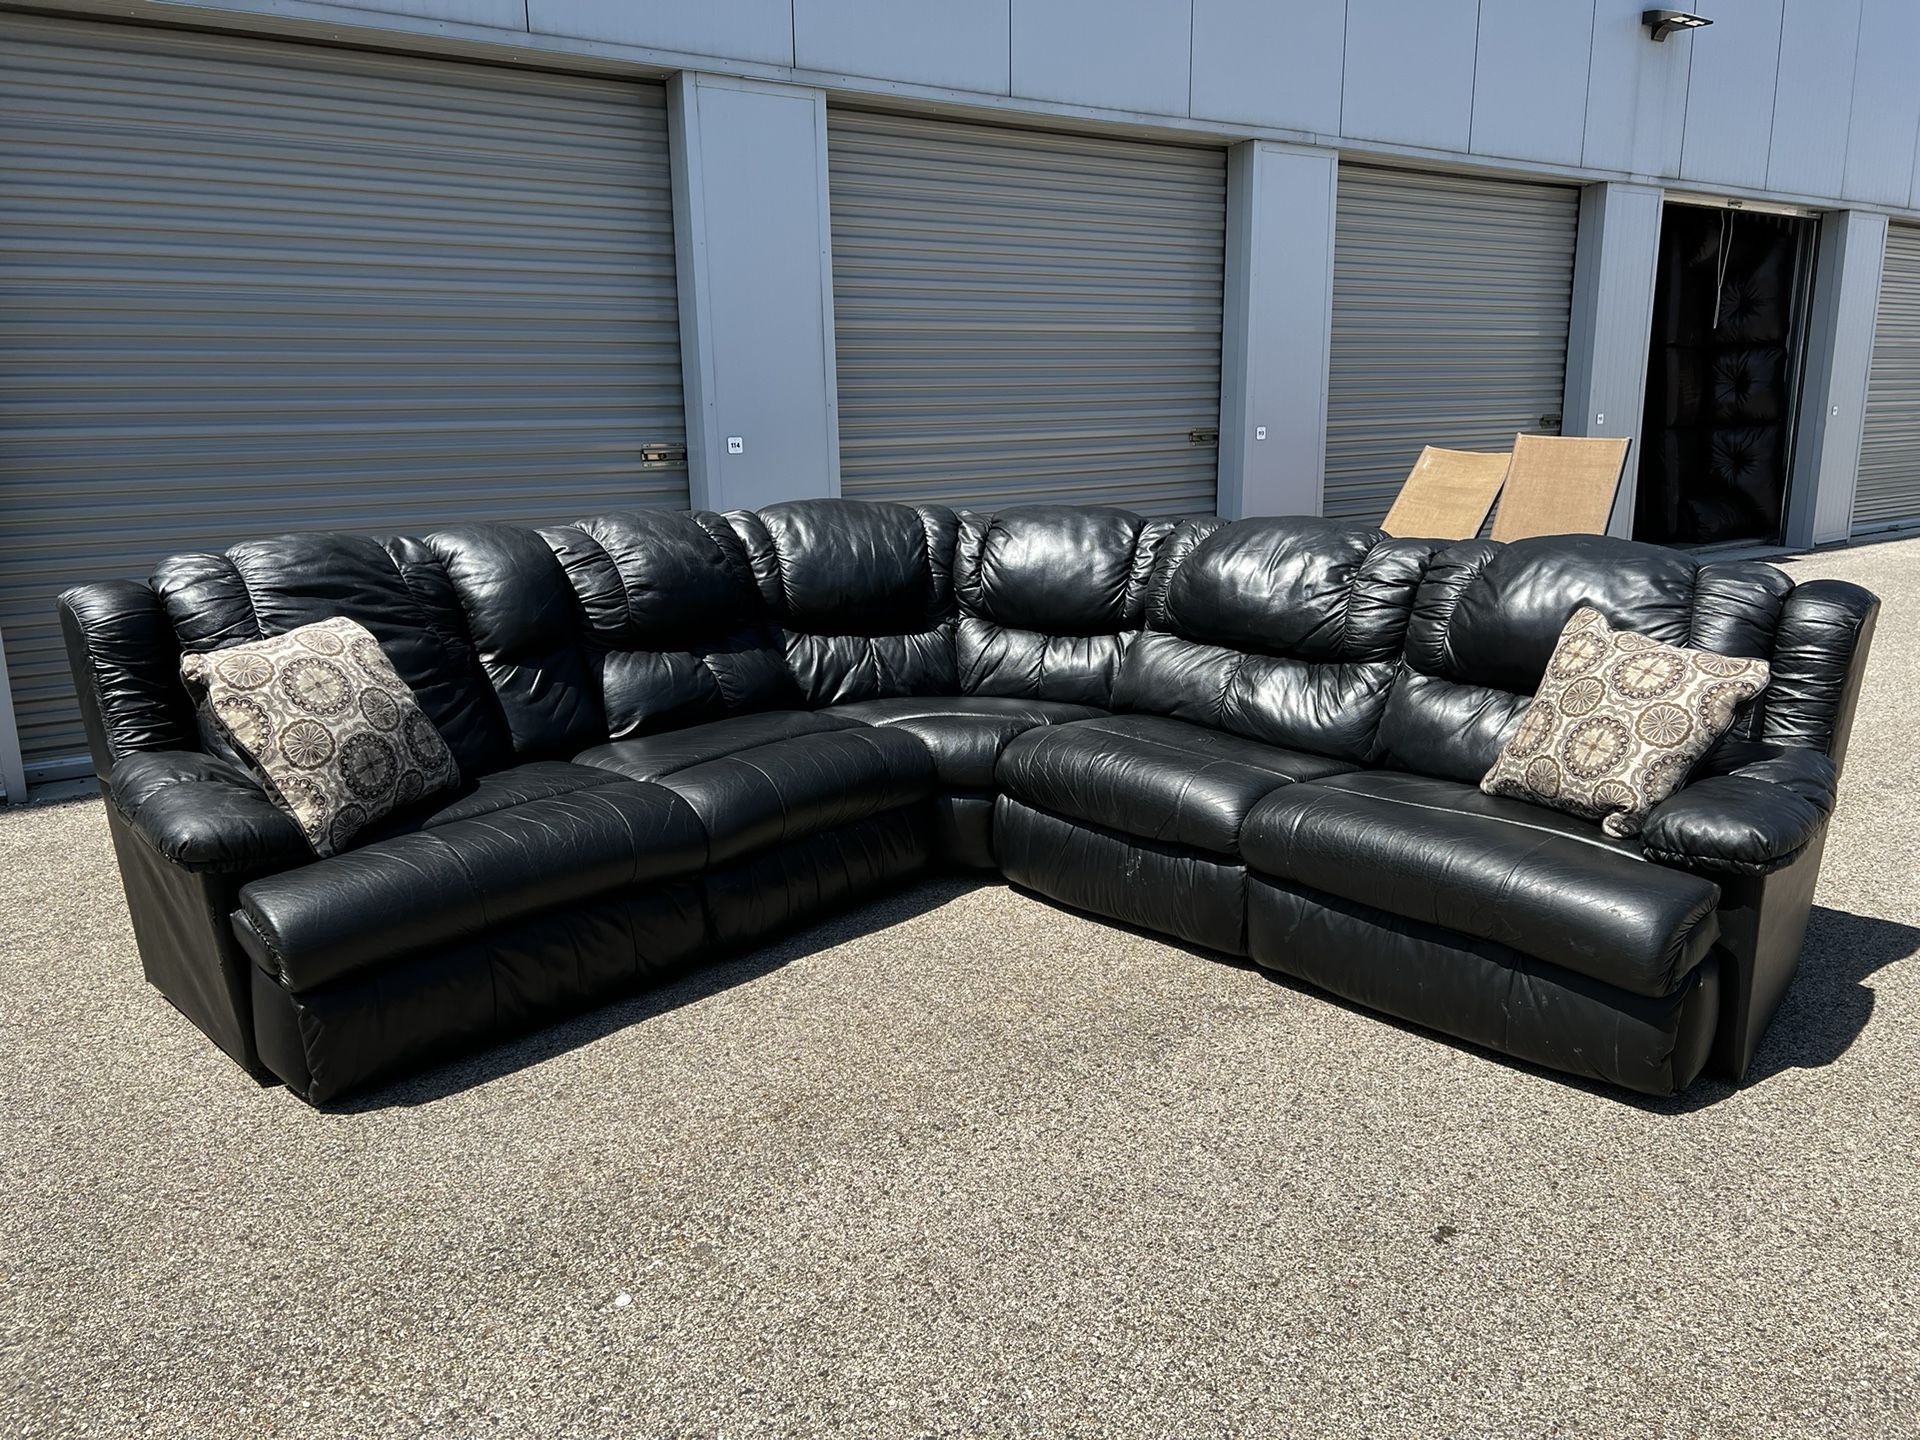 Beautiful Black Leather Sectional Sofa-Bed and Recliner! 🚚 ***Free Delivery***  